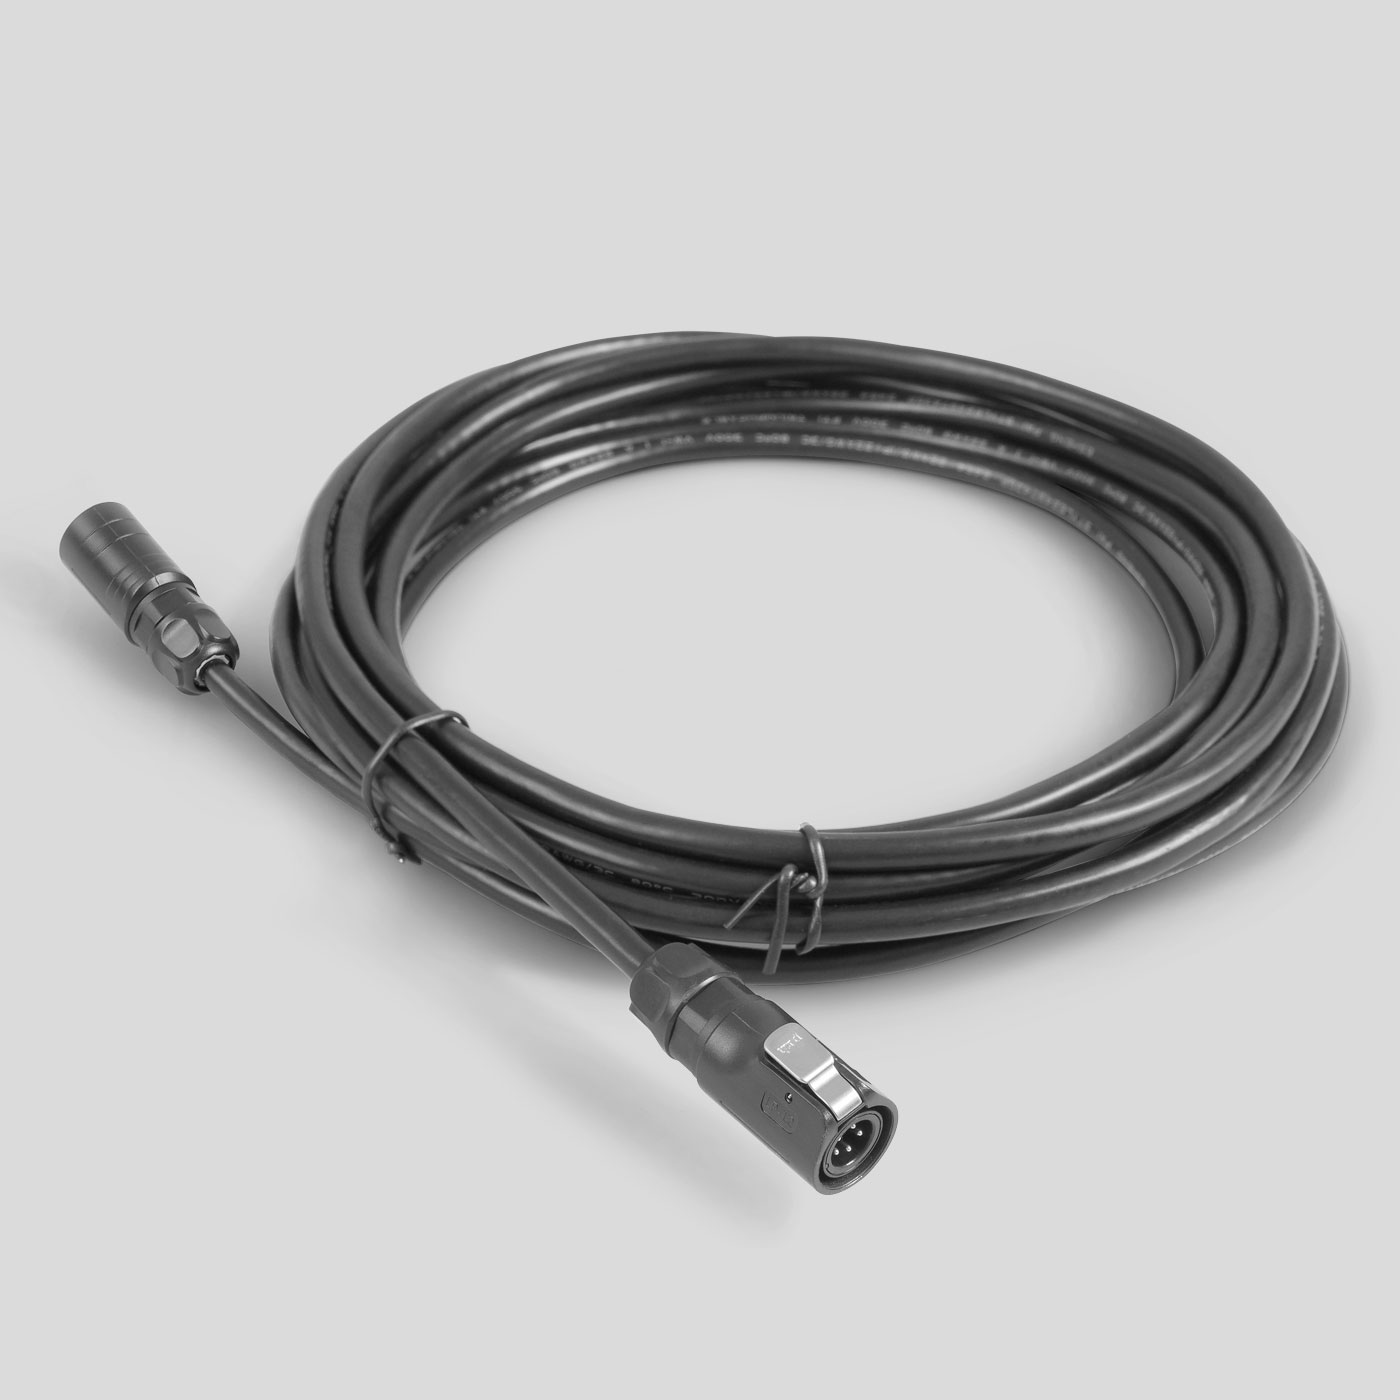 TTSL® connecting cable